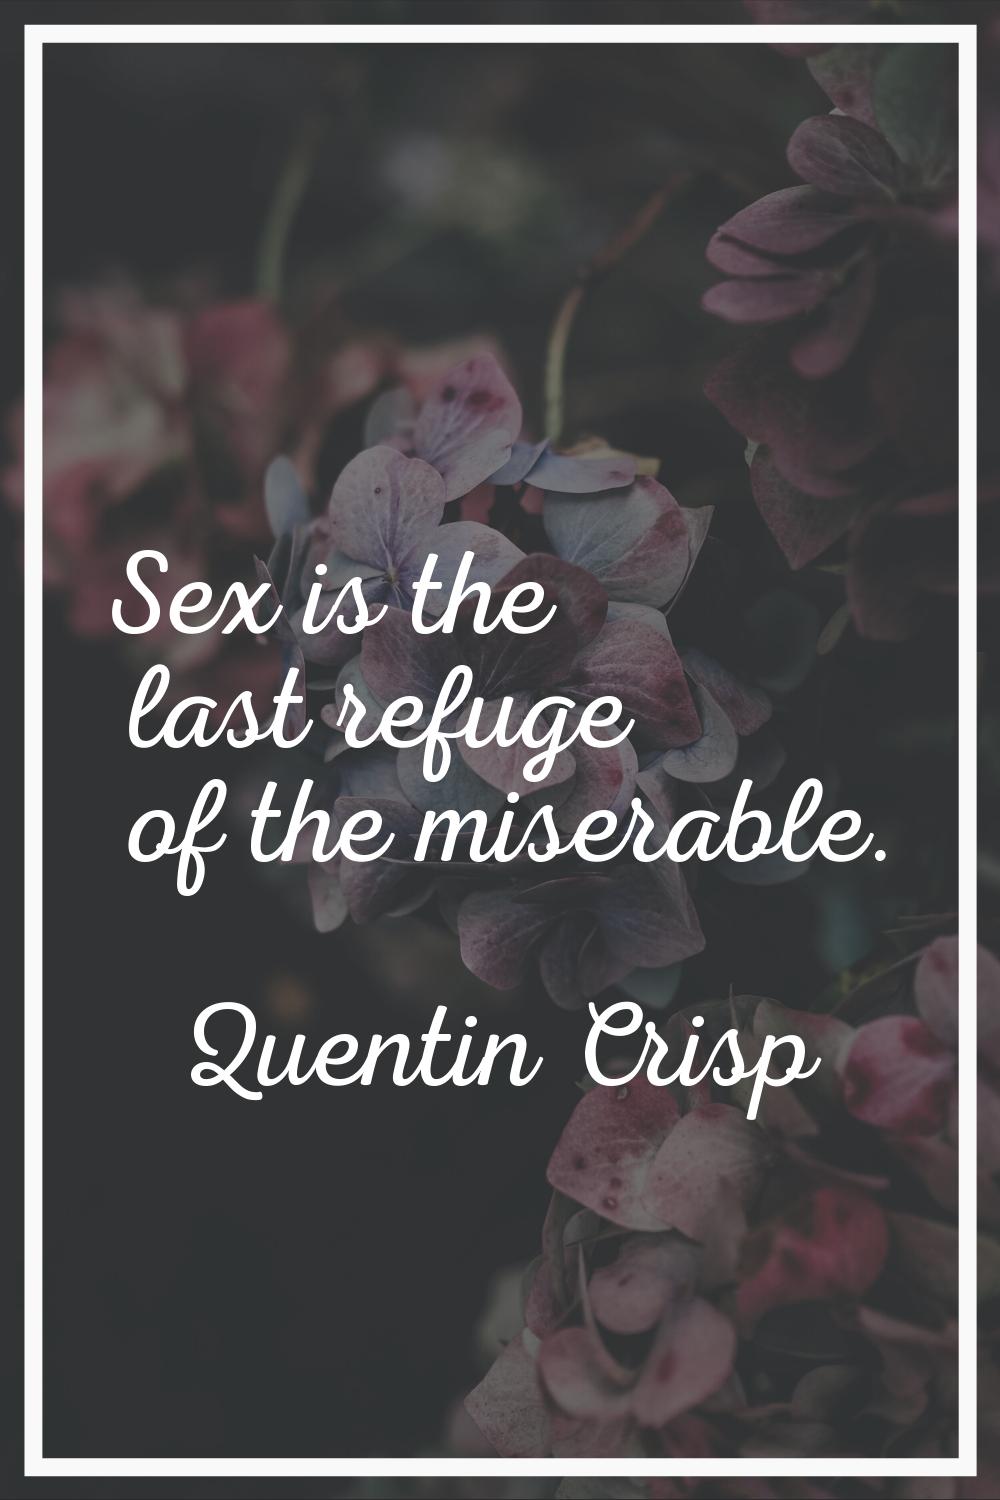 Sex is the last refuge of the miserable.